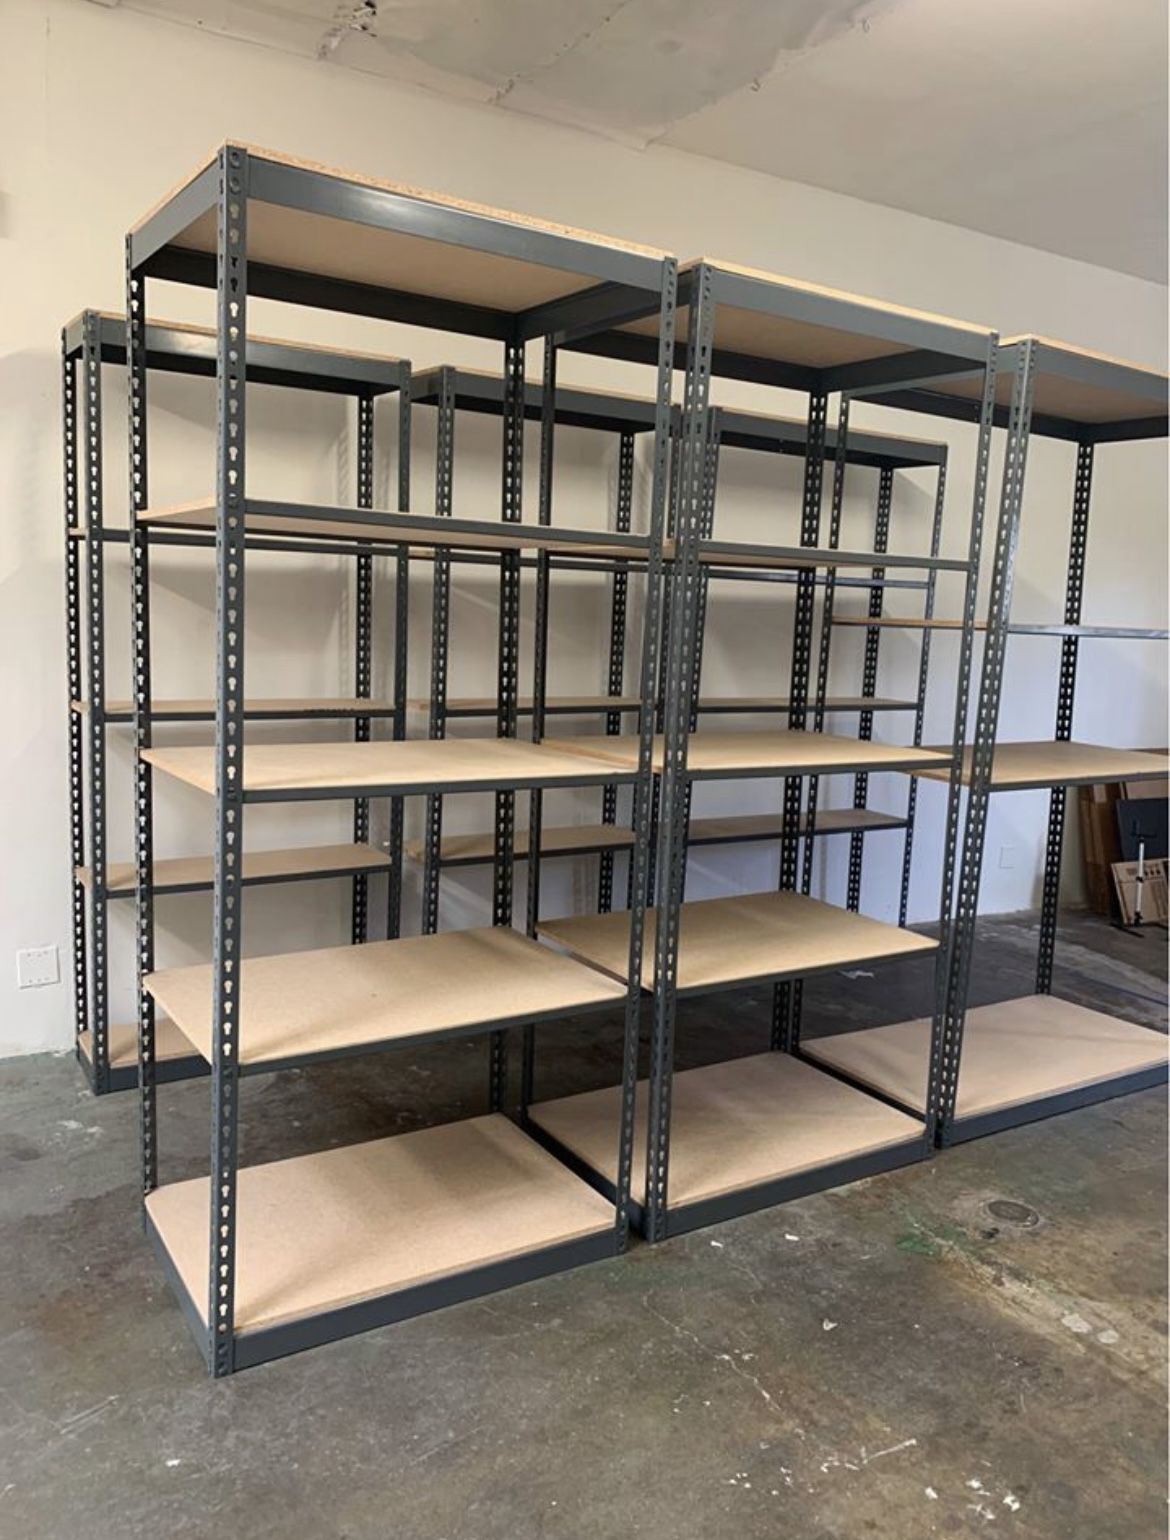 Industrial Shelves 4 Ft W X 2 Ft D New Warehouse Storage Shelving Boltless Supply Racks Better Than Homedepot Lowes And Costco Delivery Available